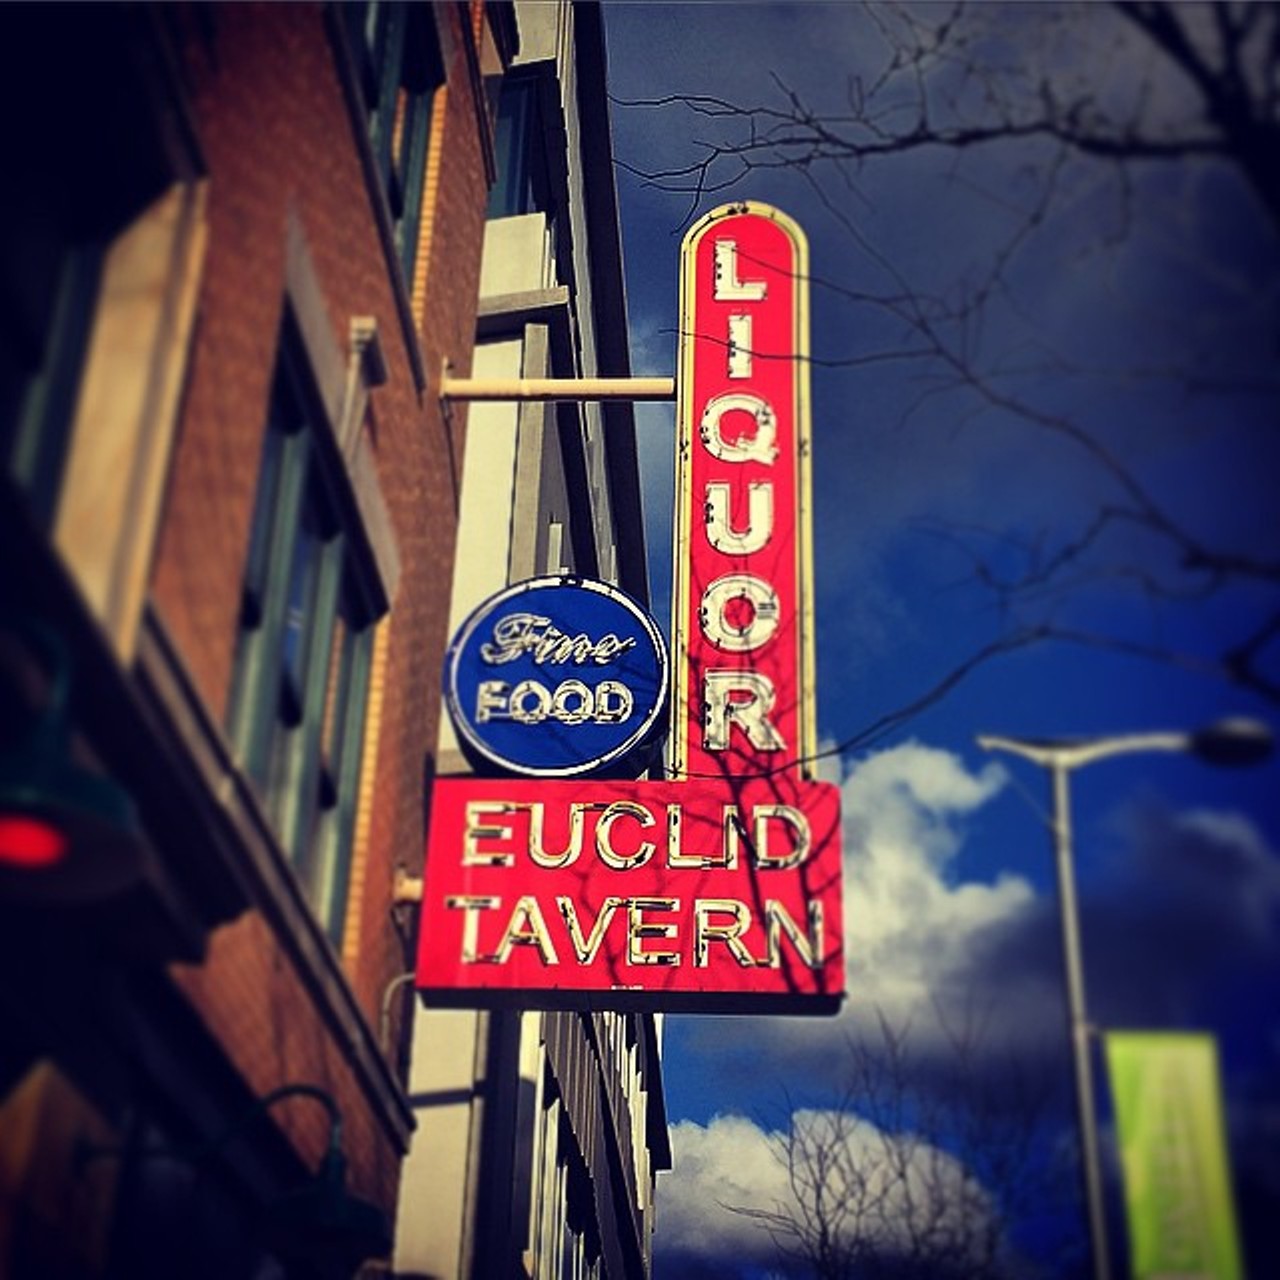 EUCLID TAVERN - 
Established in 1908, this century-plus classic is now home to Happy Dog at the Euclid Tavern, but it maintains all of its original character. 
Find it at 11625 Euclid Ave., Cleveland (Photo via mbterwilliger, Instagram)